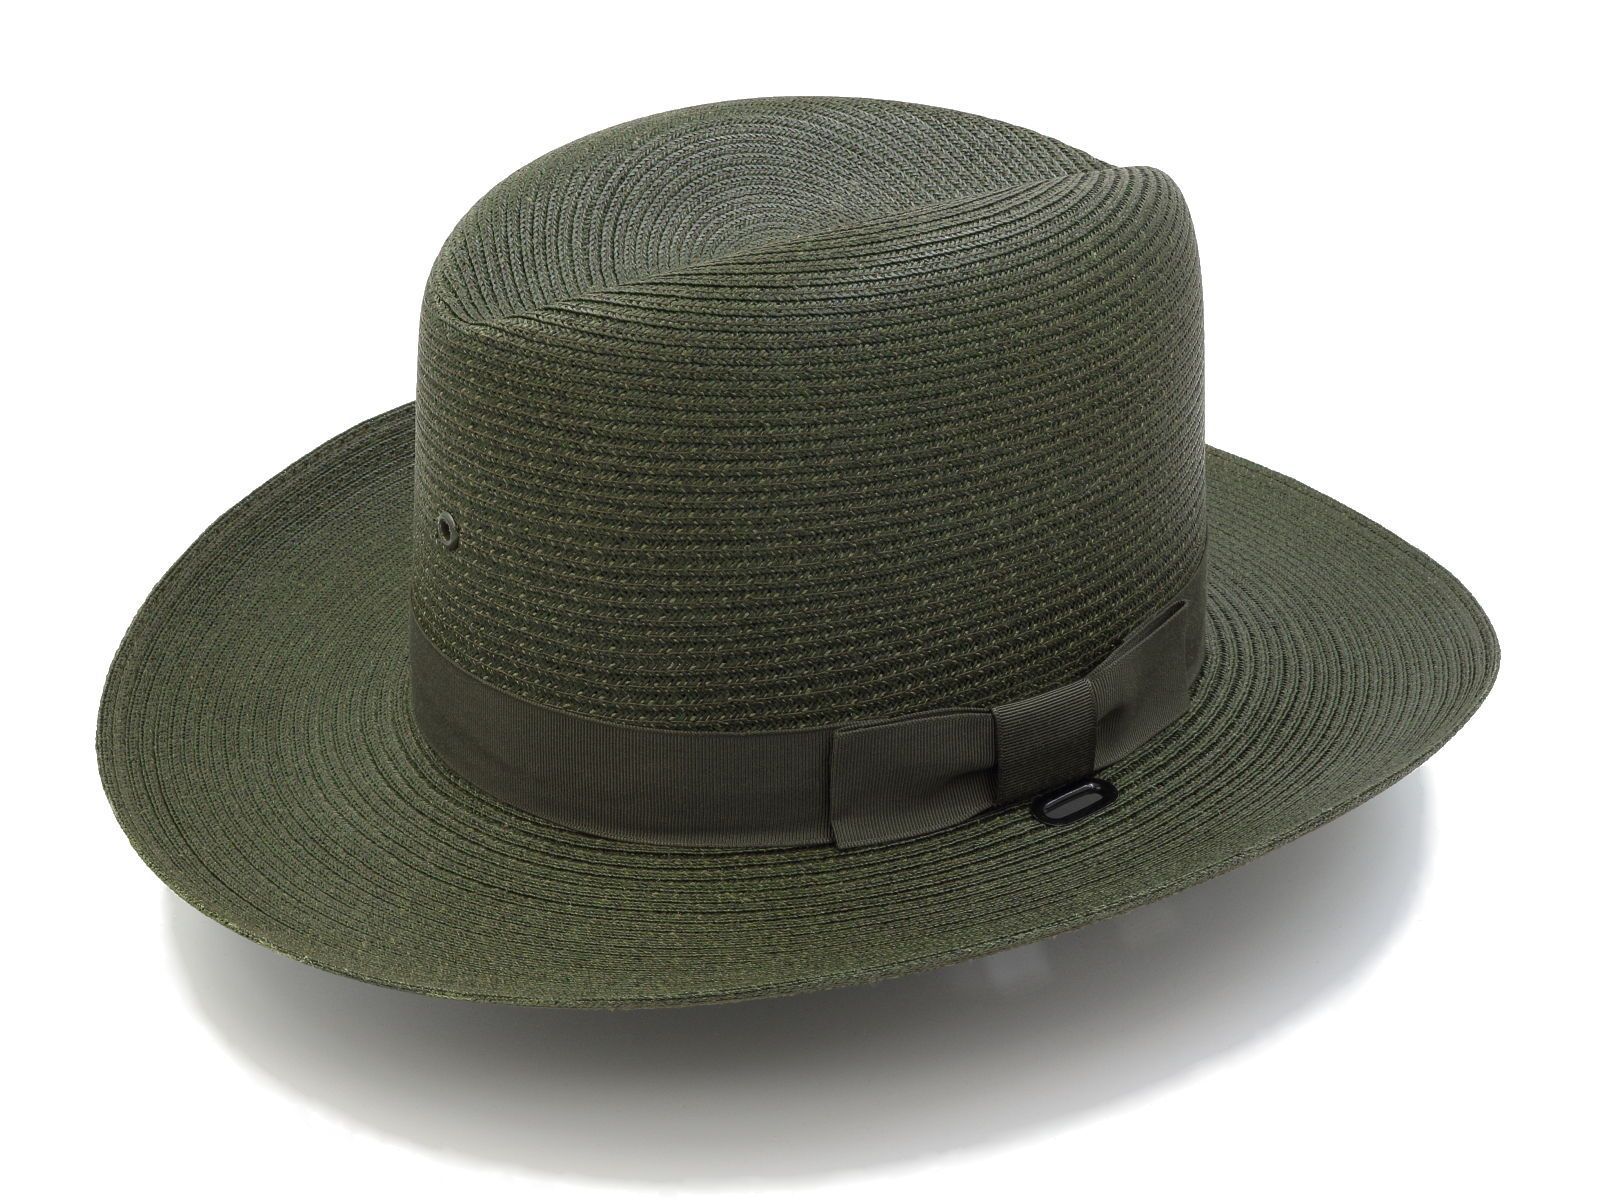 Stratton Campaign Style Straw Hat S40 - Grey - 6 3/4 - Clearance